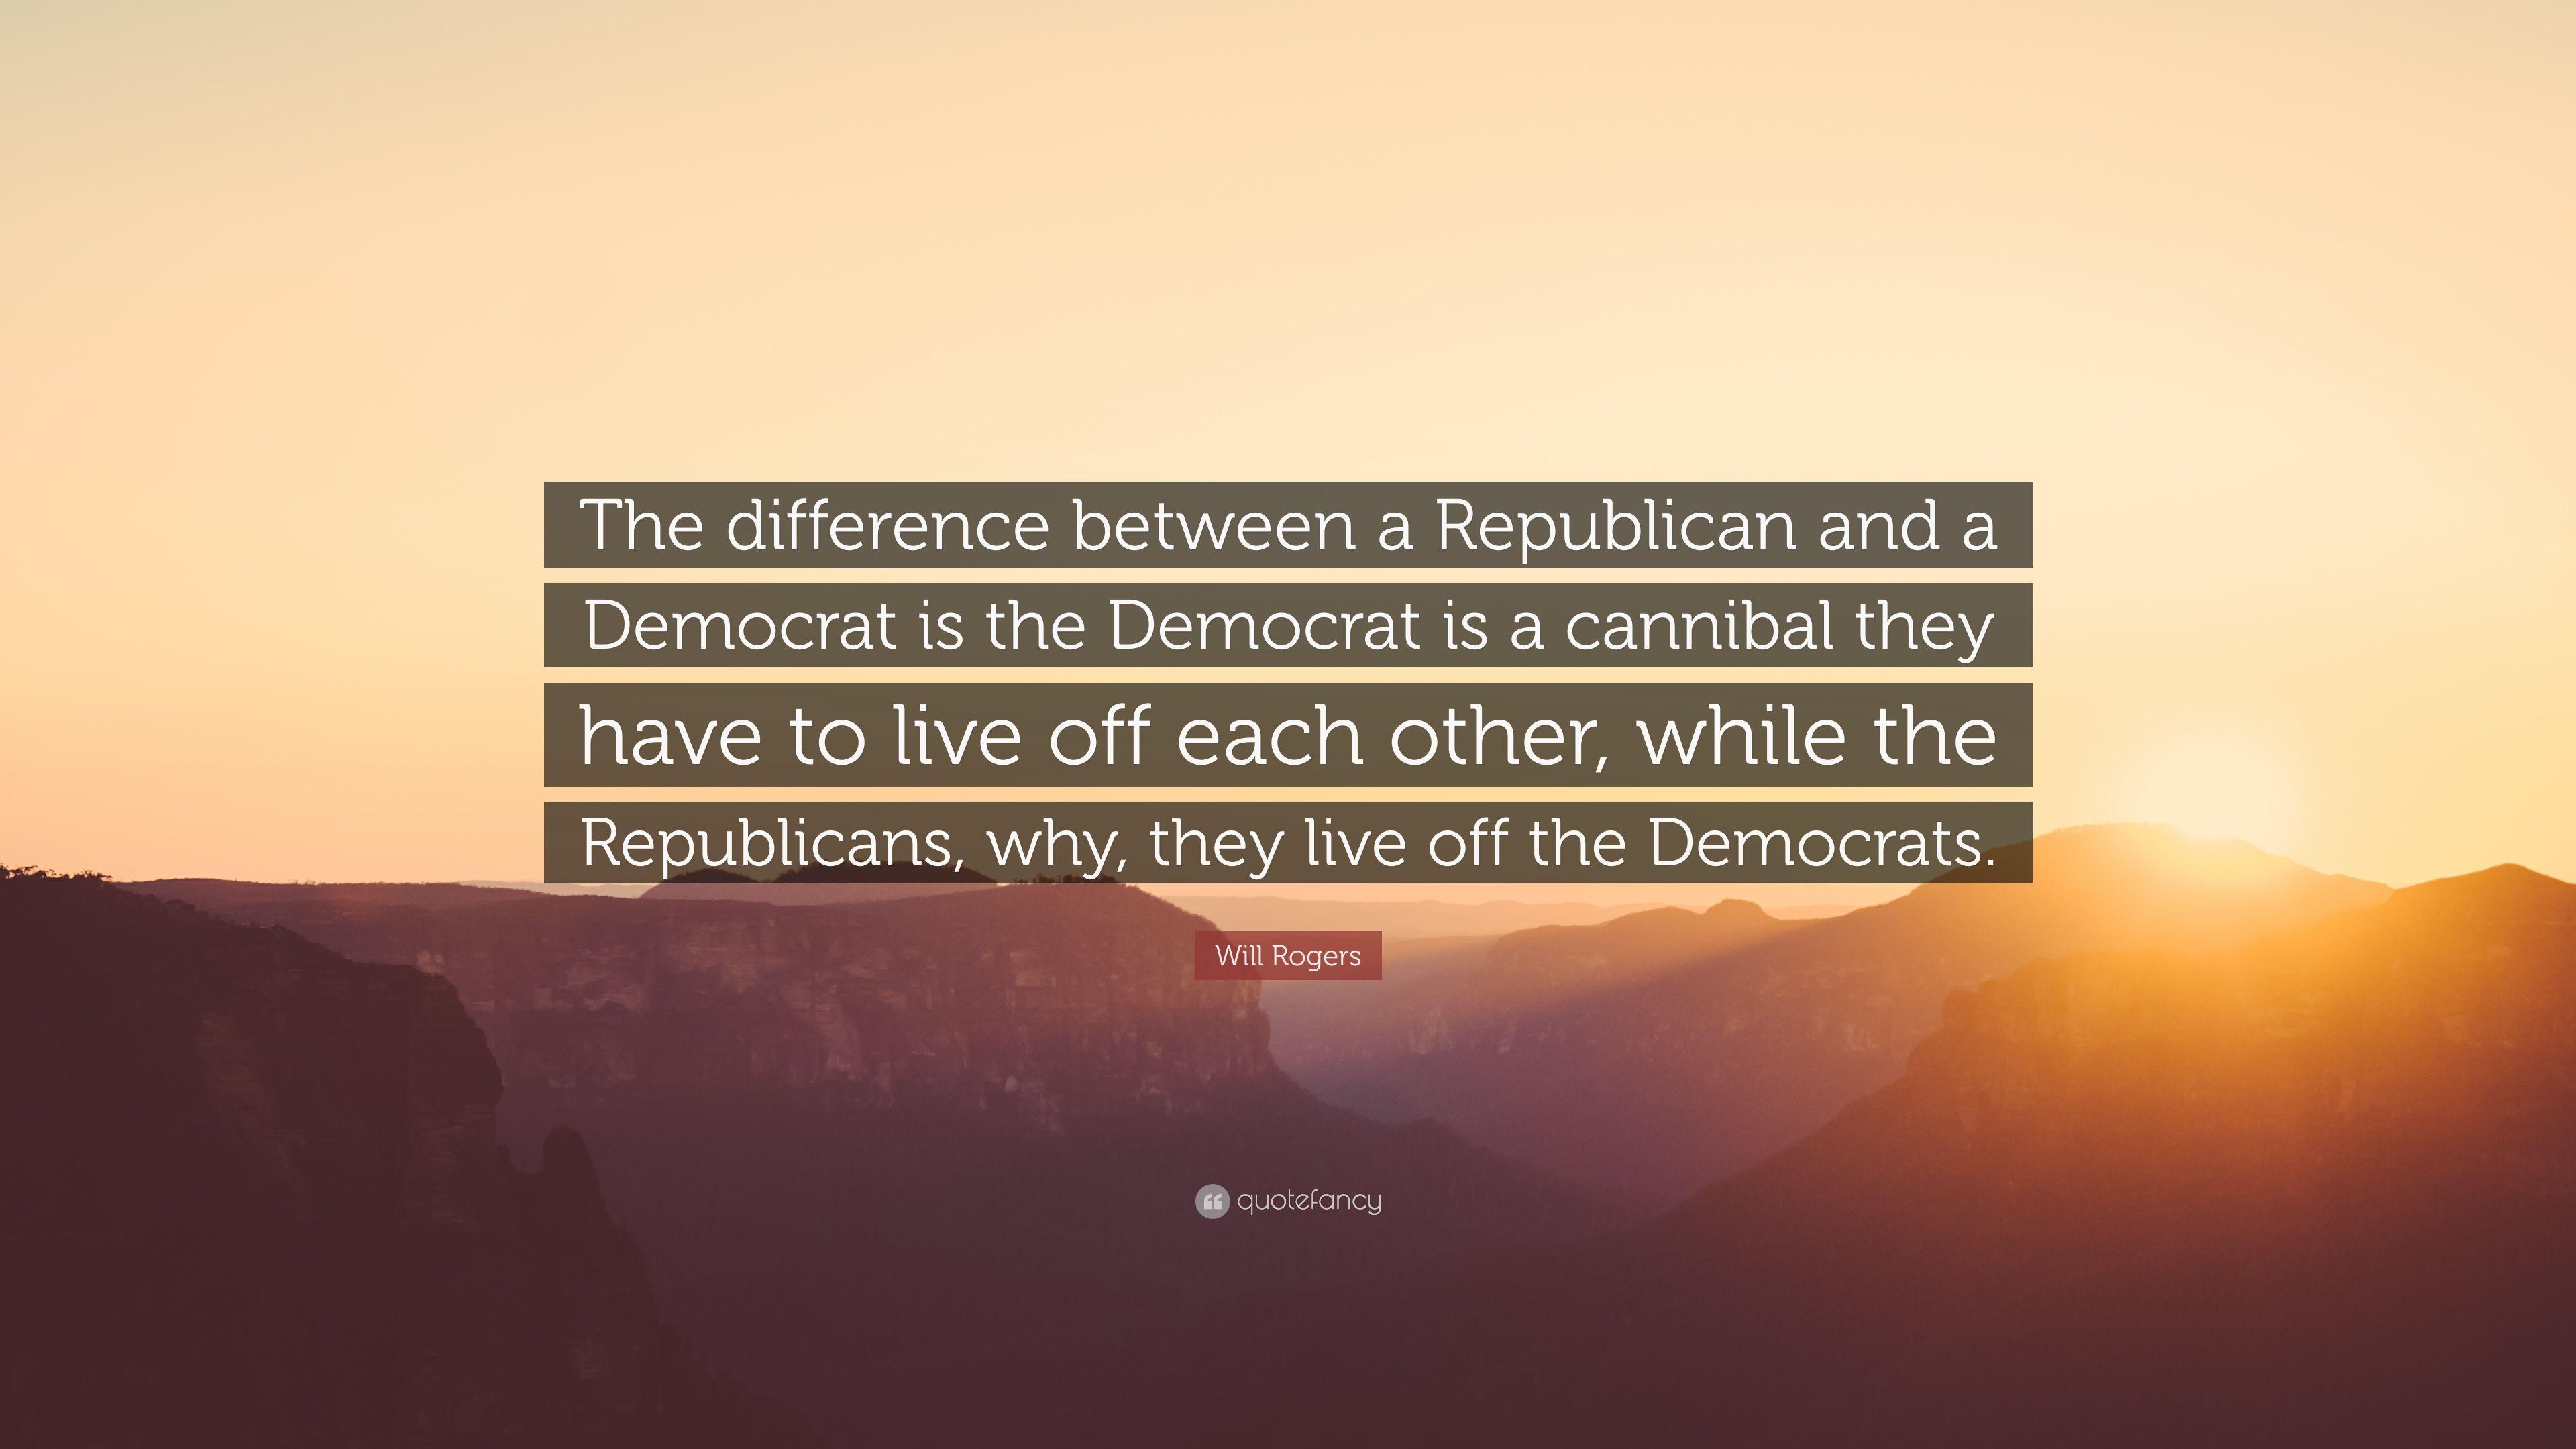 Will Rogers Quote: “The difference between a Republican and a